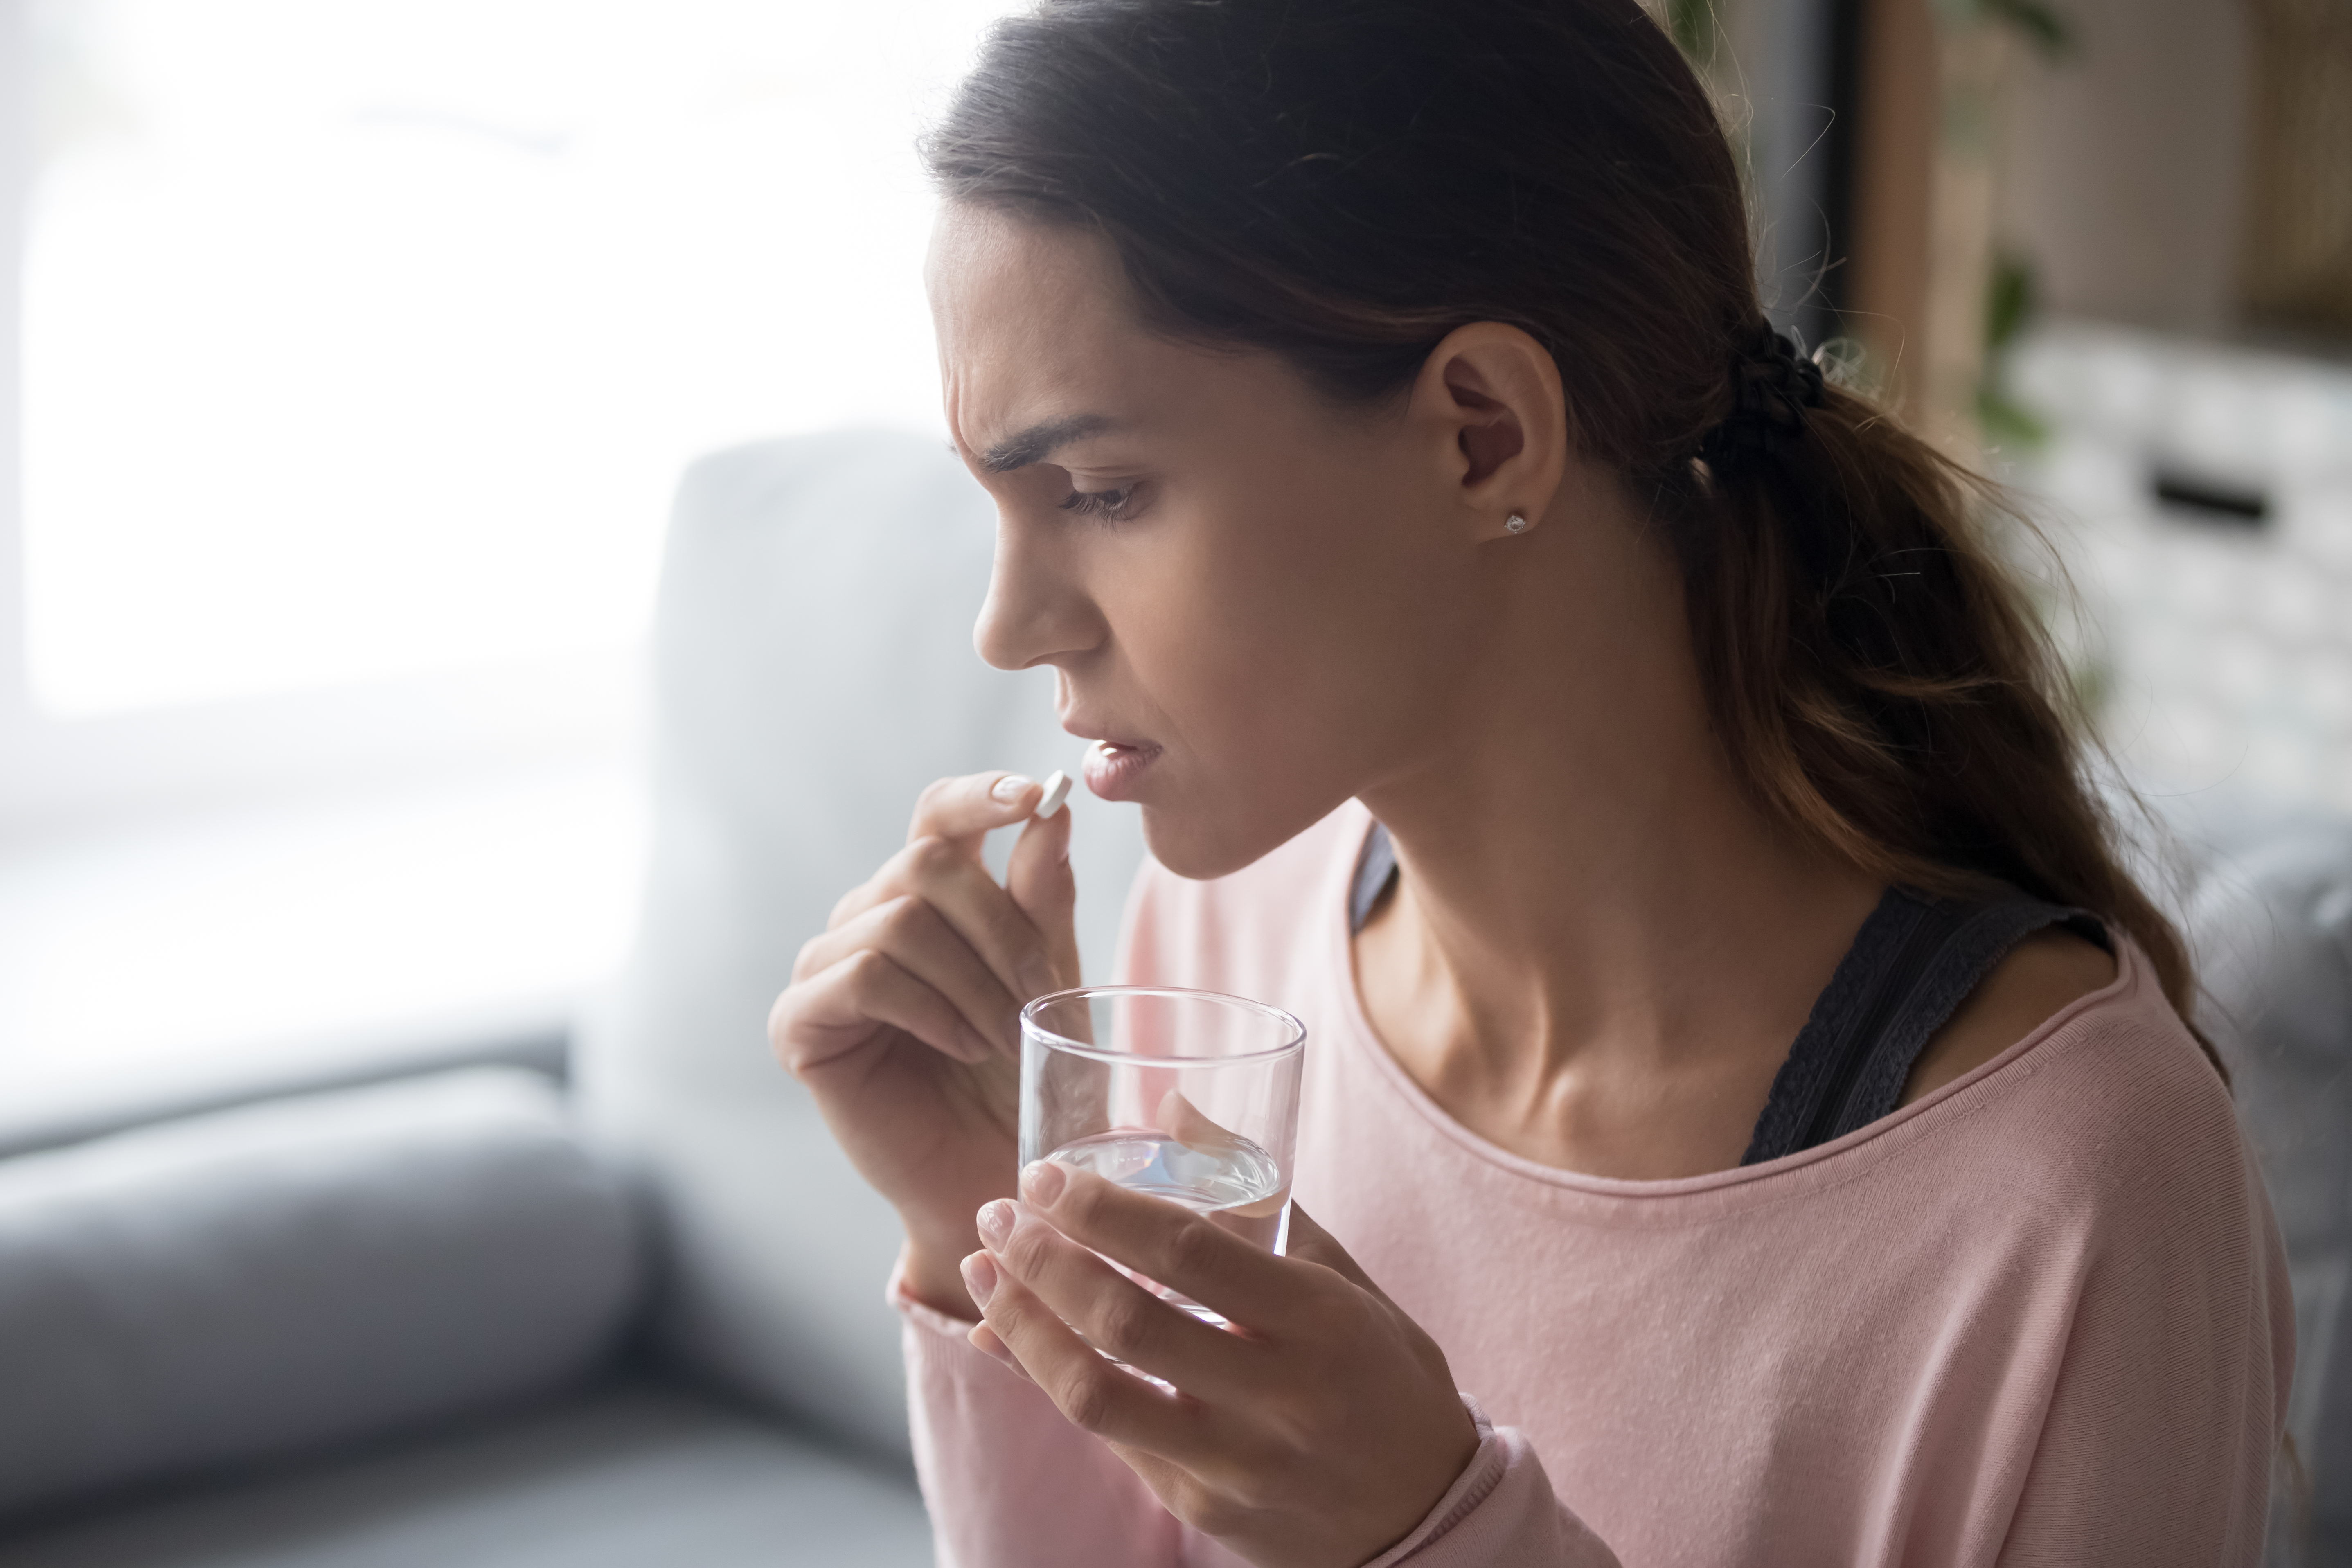 a picture of a woman taking a pill into her mouth and holding a glass of water